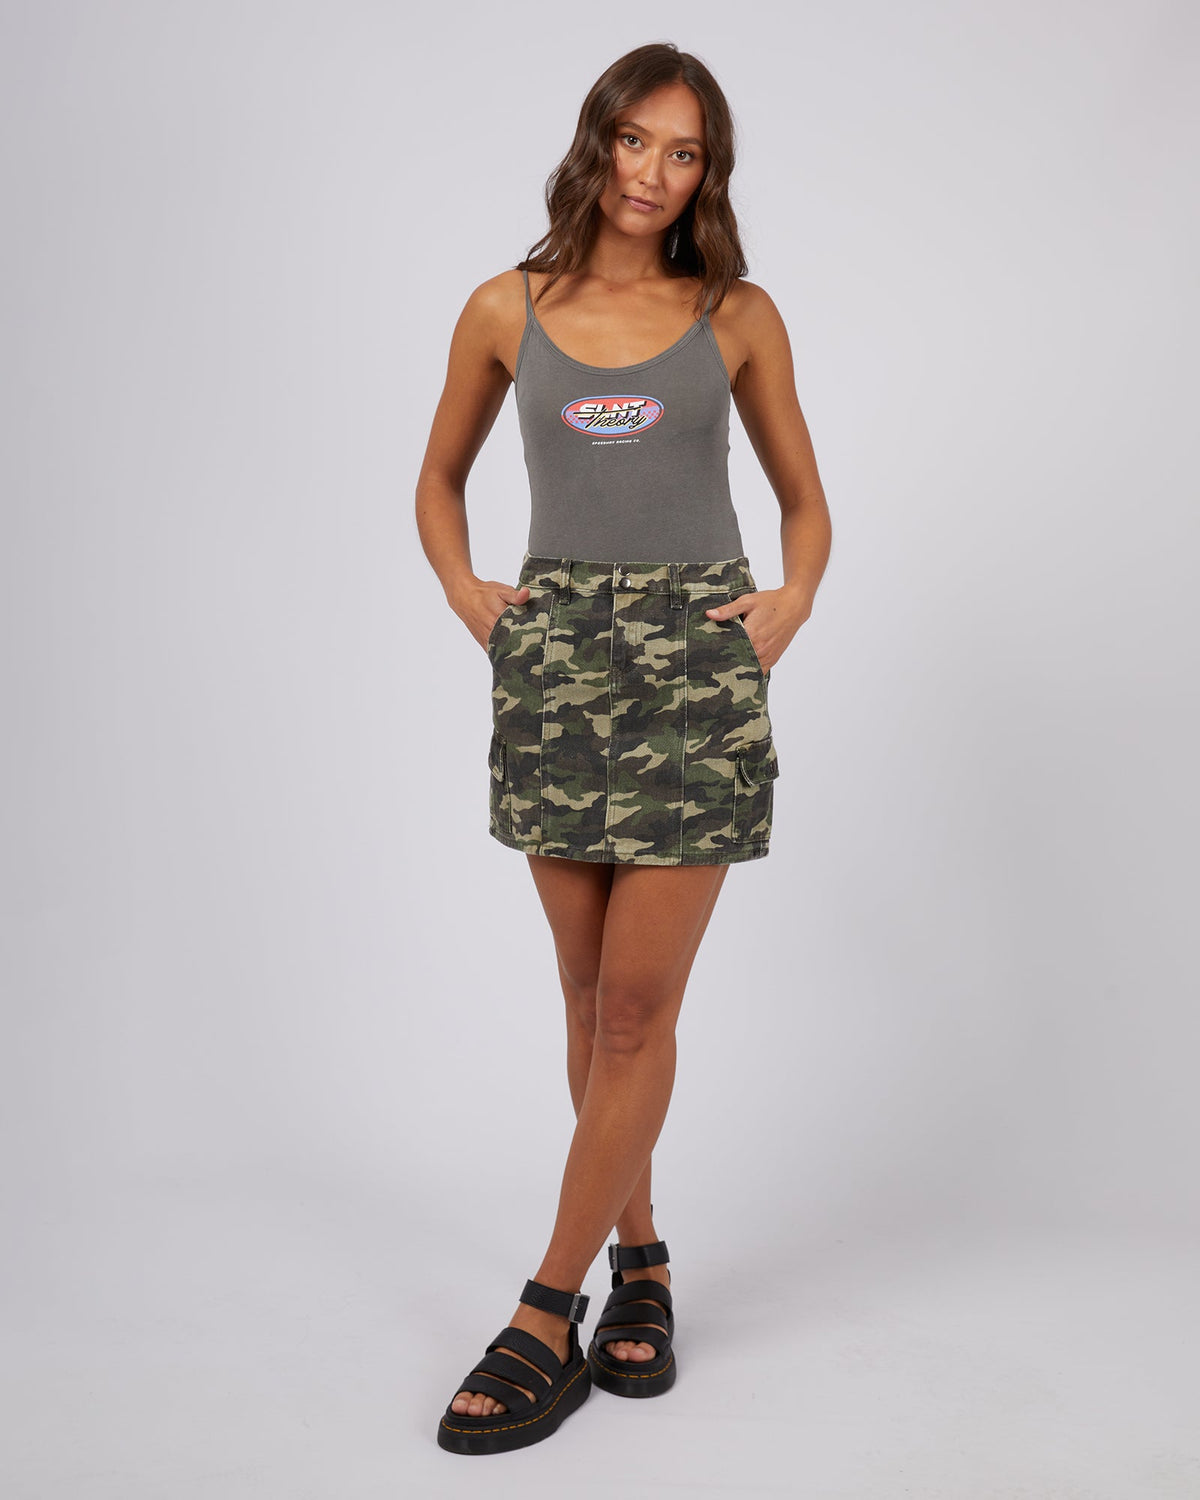 Silent Theory Ladies-Speedway Bodysuit Charcoal-Edge Clothing